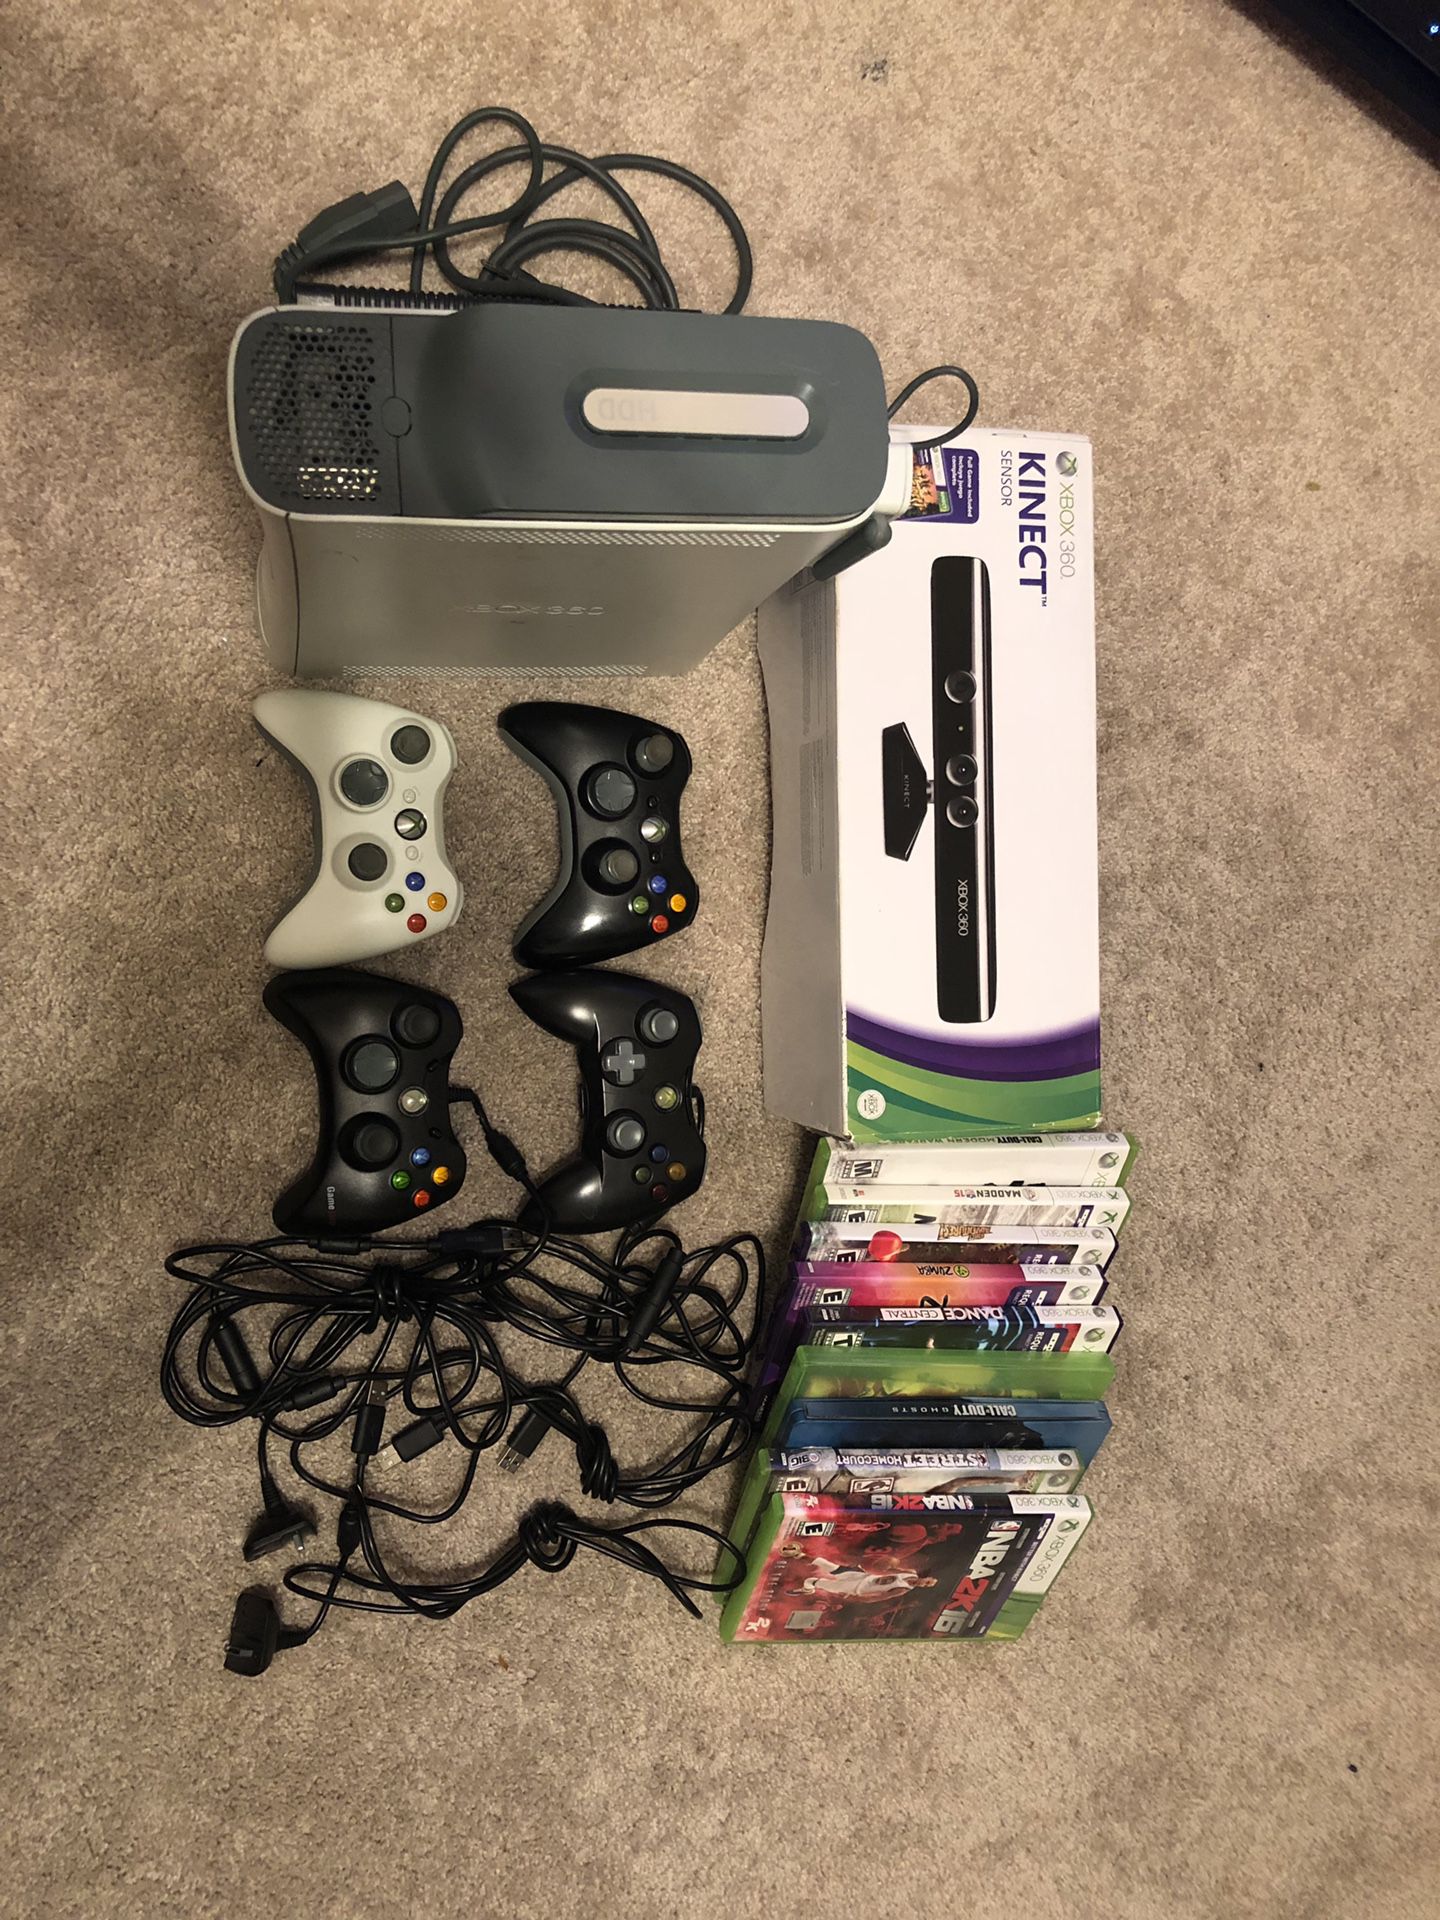 Xbox 360 with Kinect and games